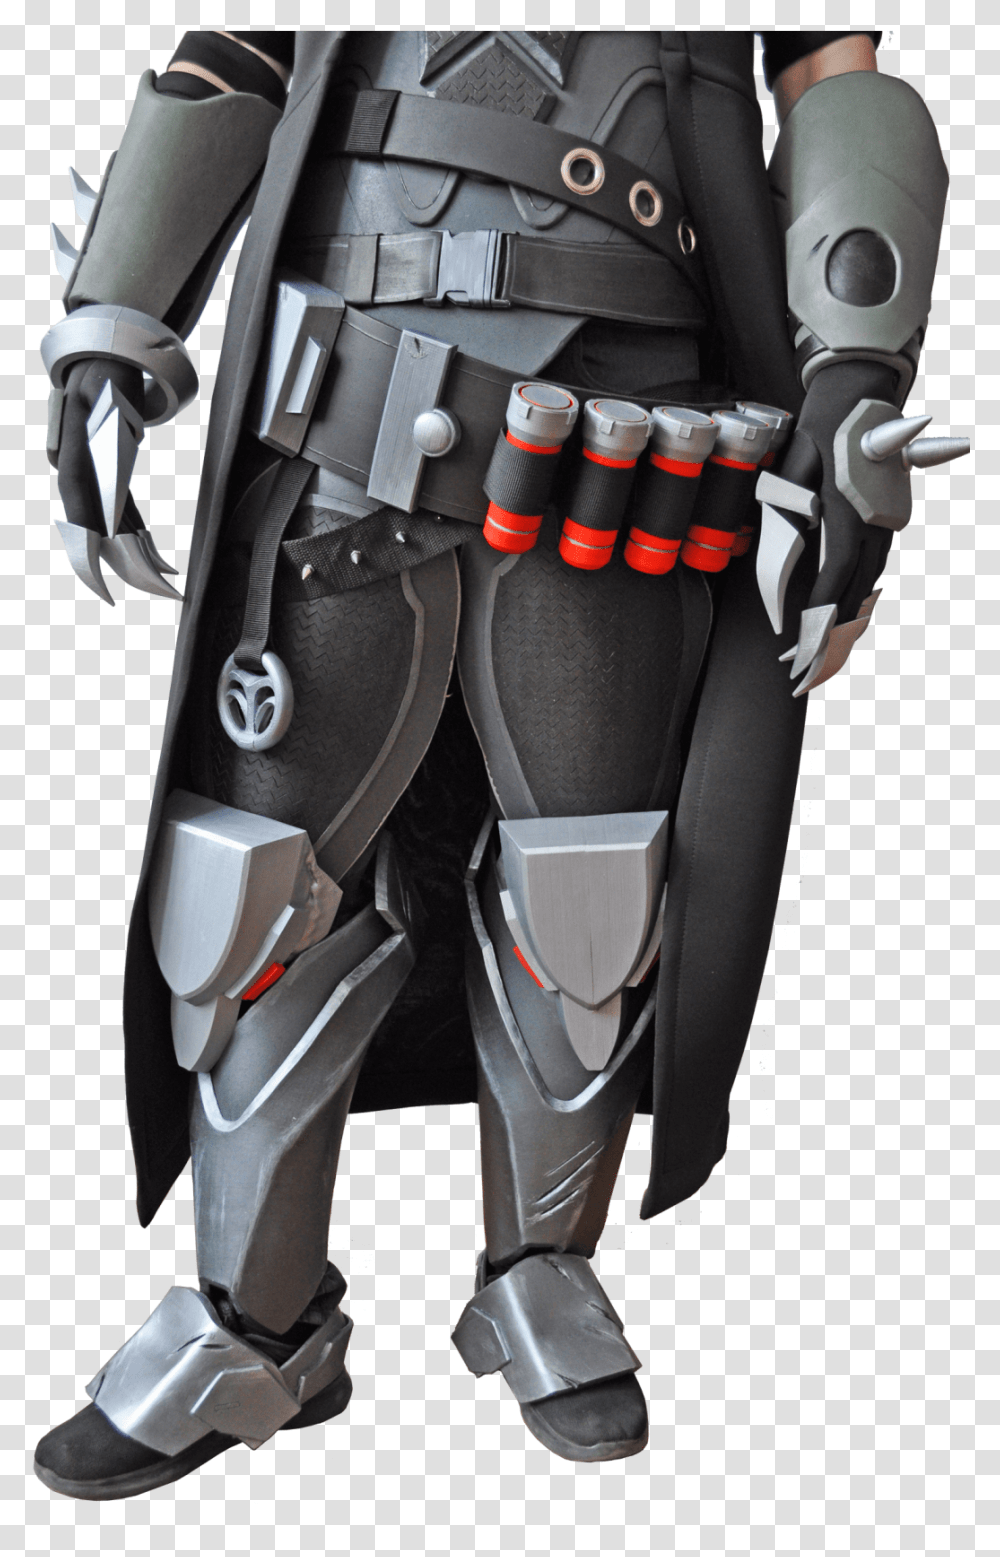 Overwatch Reaper Costume Overwatch Reaper Gauntlets, Apparel, Weapon, Weaponry Transparent Png